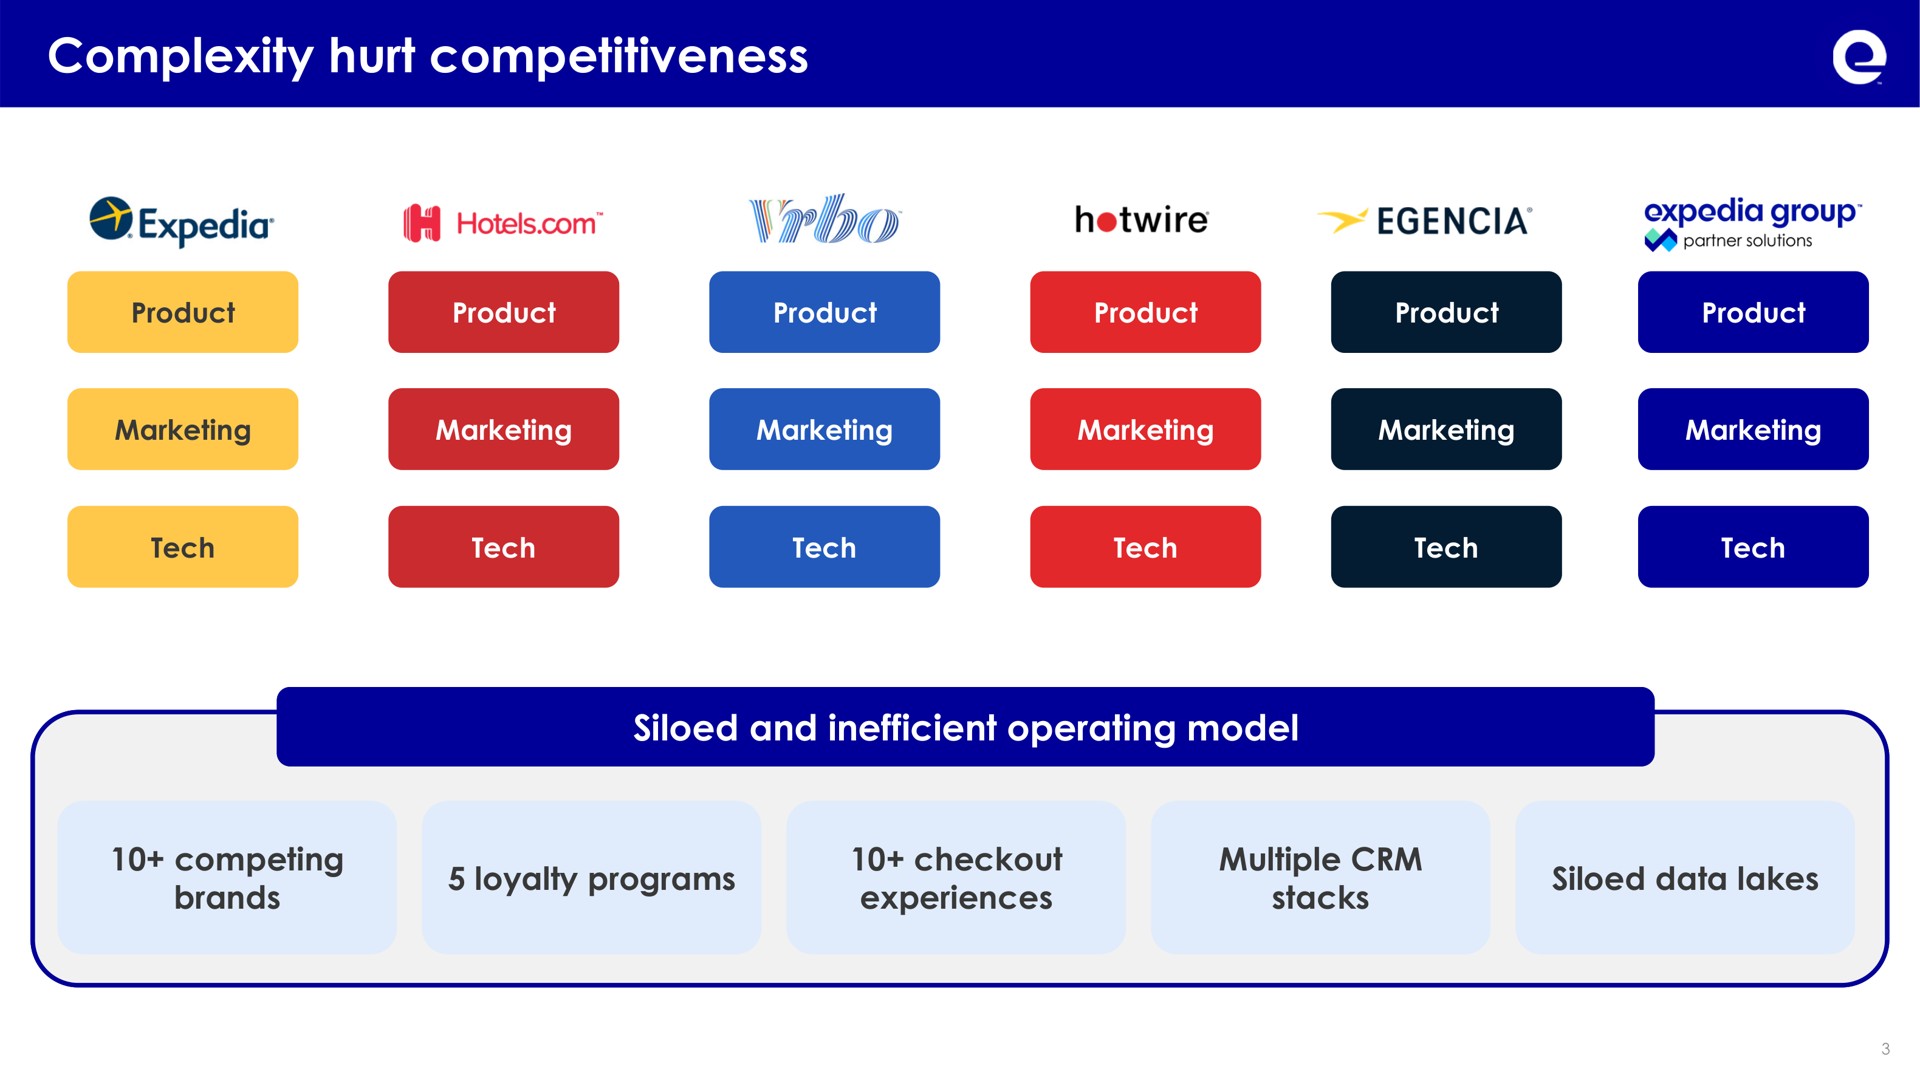 complexity hurt competitiveness hotels group data lakes brands loyalty programs stacks | Expedia